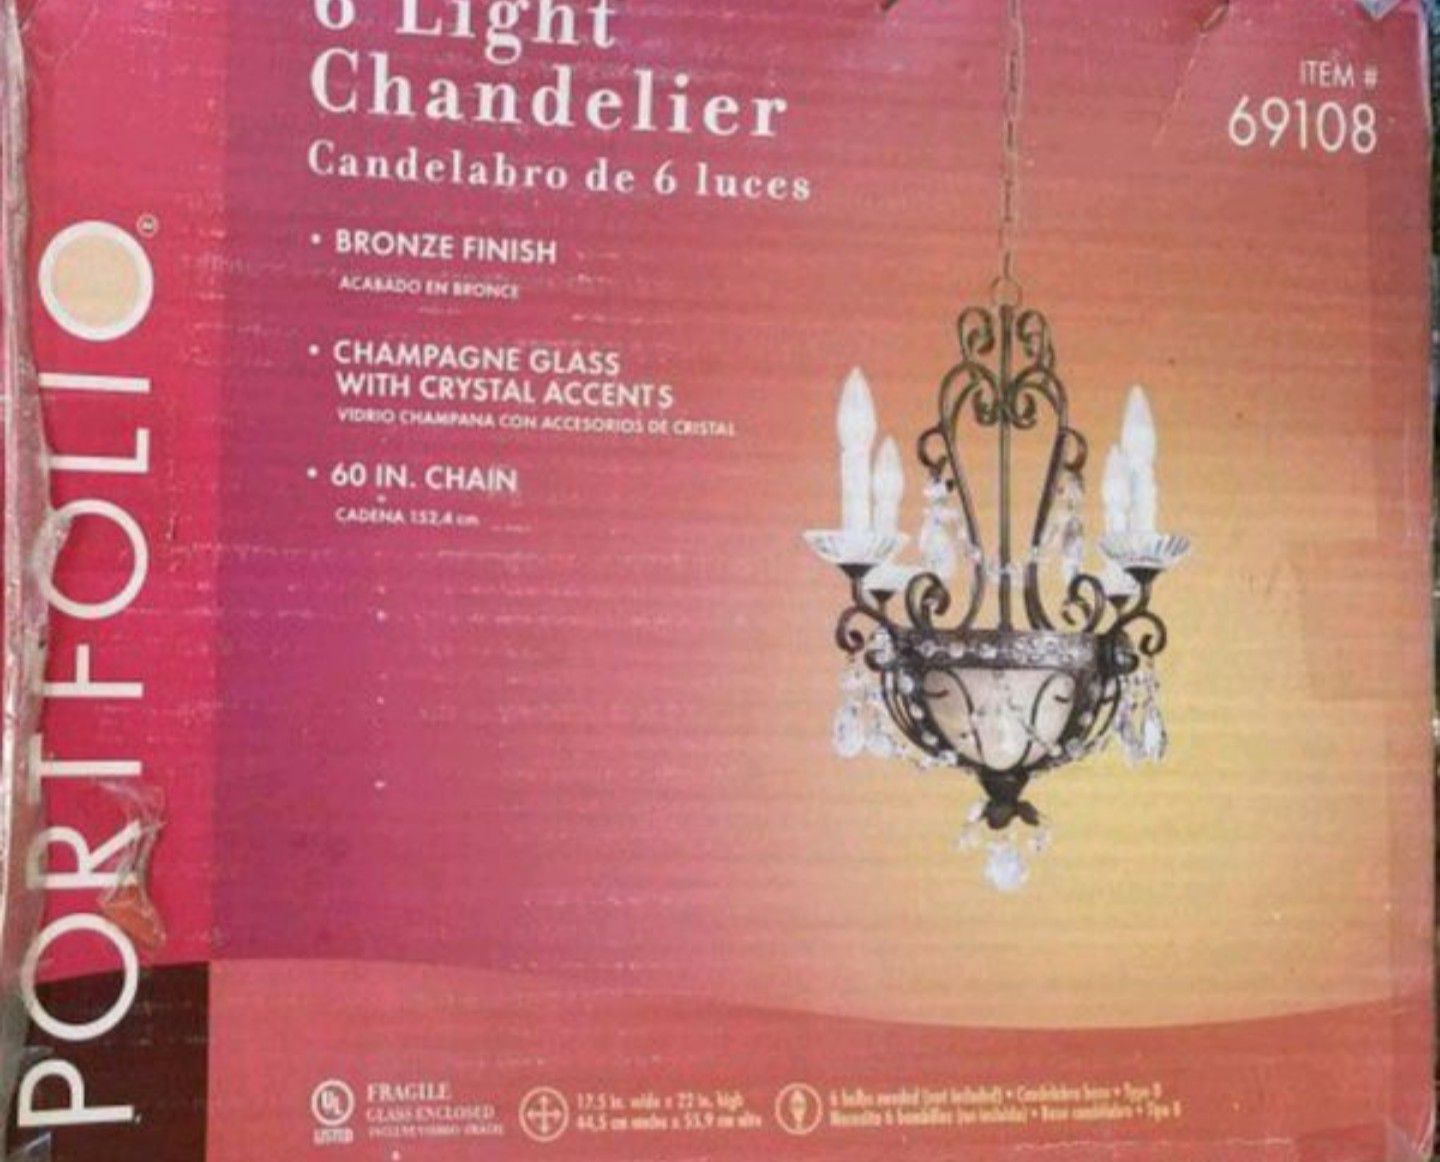 New 6 Light Chandelier Champagne Glass with Crystal Accents